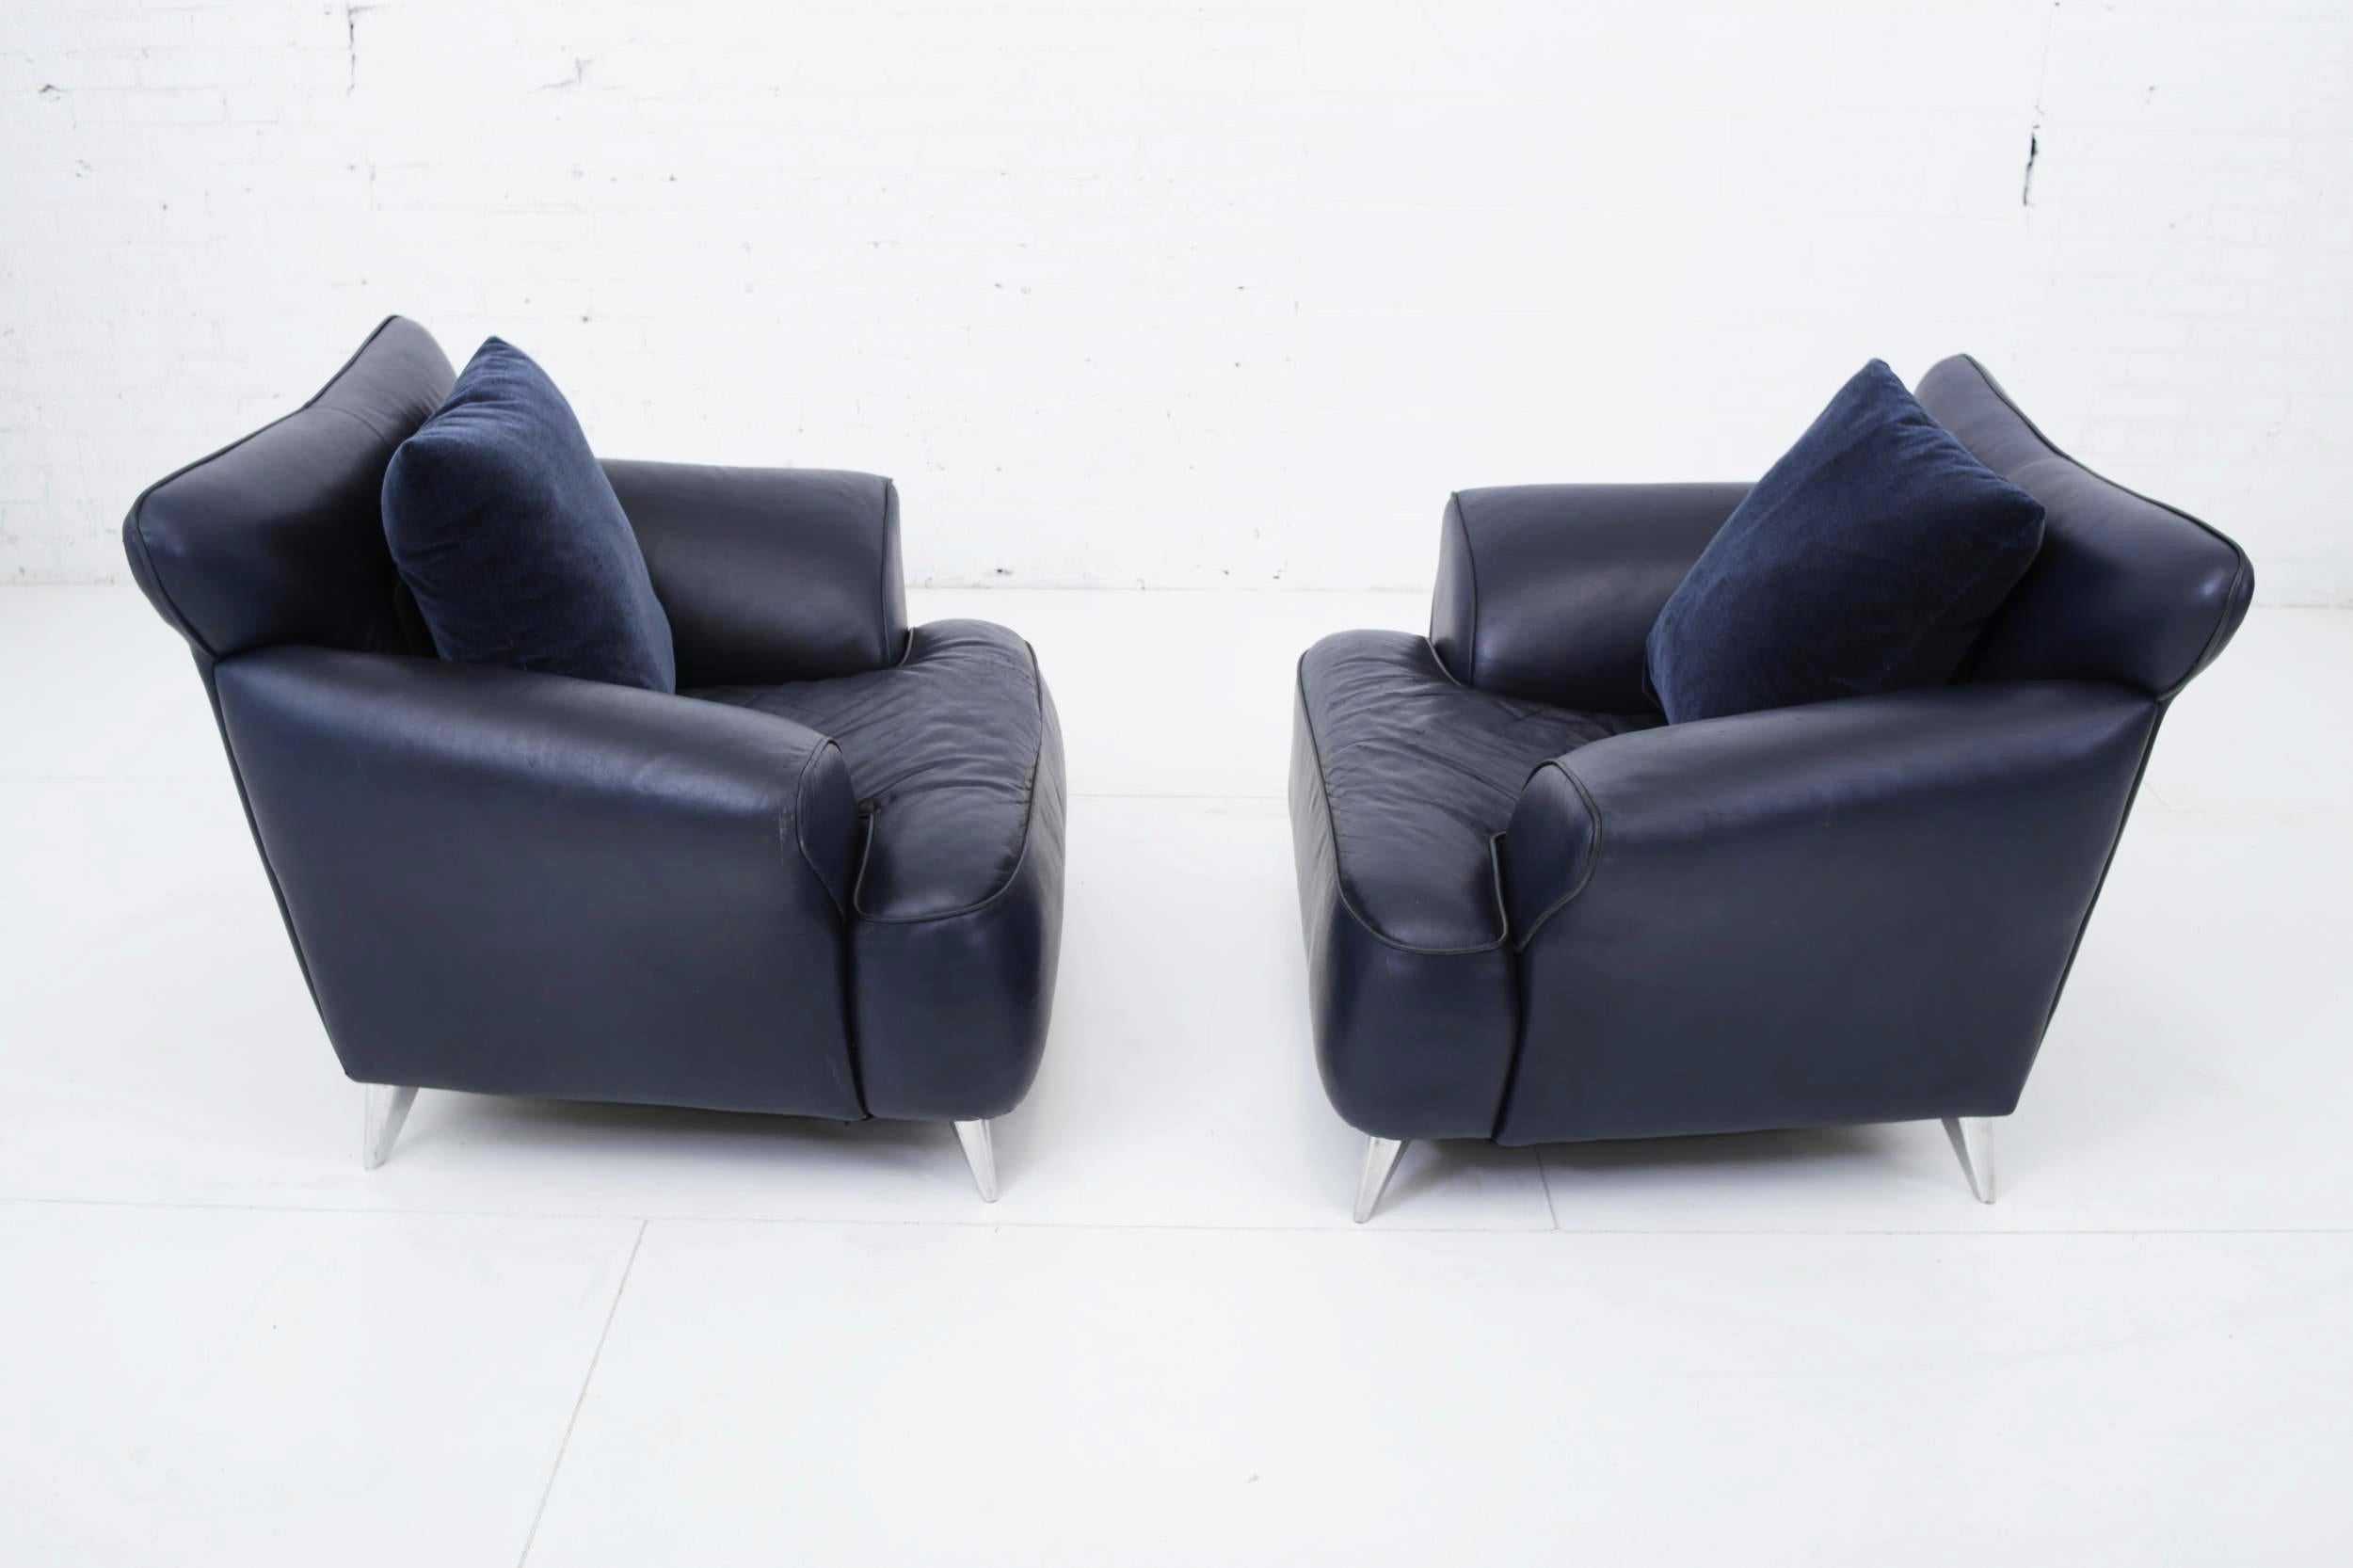 Pair of Postmodern leather and mohair lounge chairs, polished aluminum legs, circa 1988.